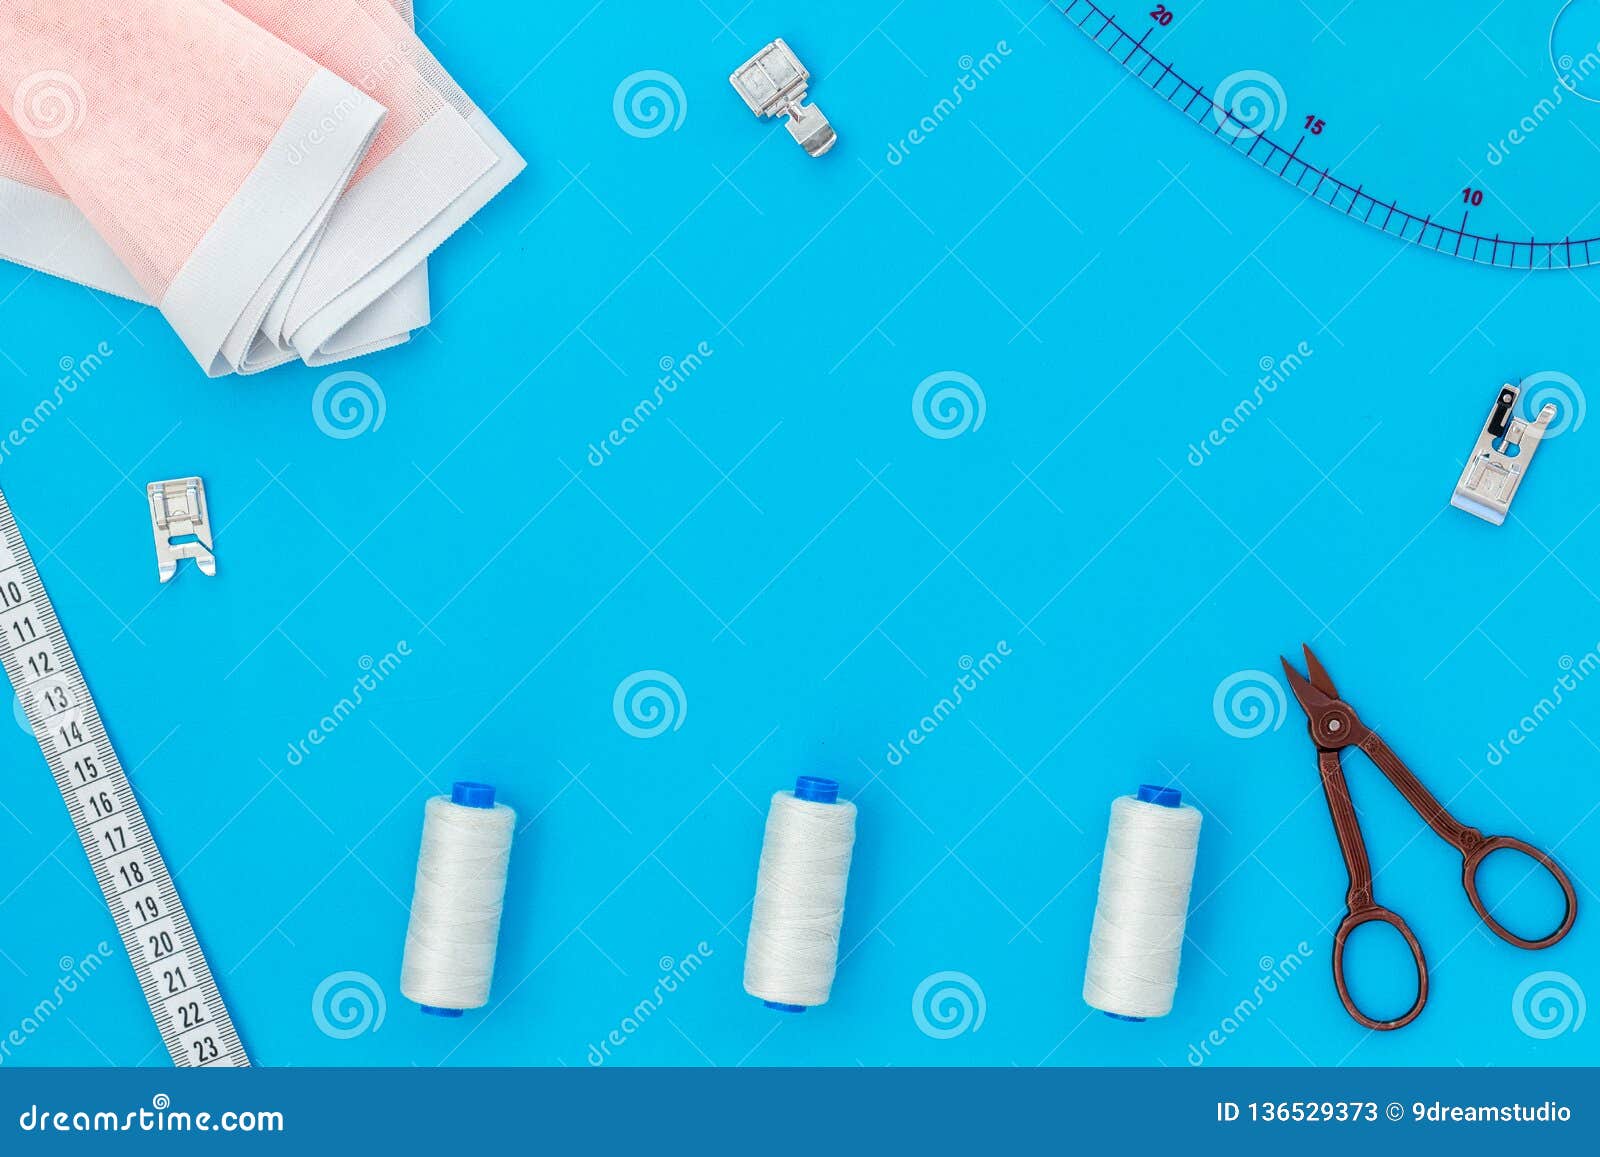 Woman Hobby. Set for Tailor Shop with Thread, Scissors, Fabric on Blue  Background Top View Copy Space Stock Image - Image of office, feminine:  136529373